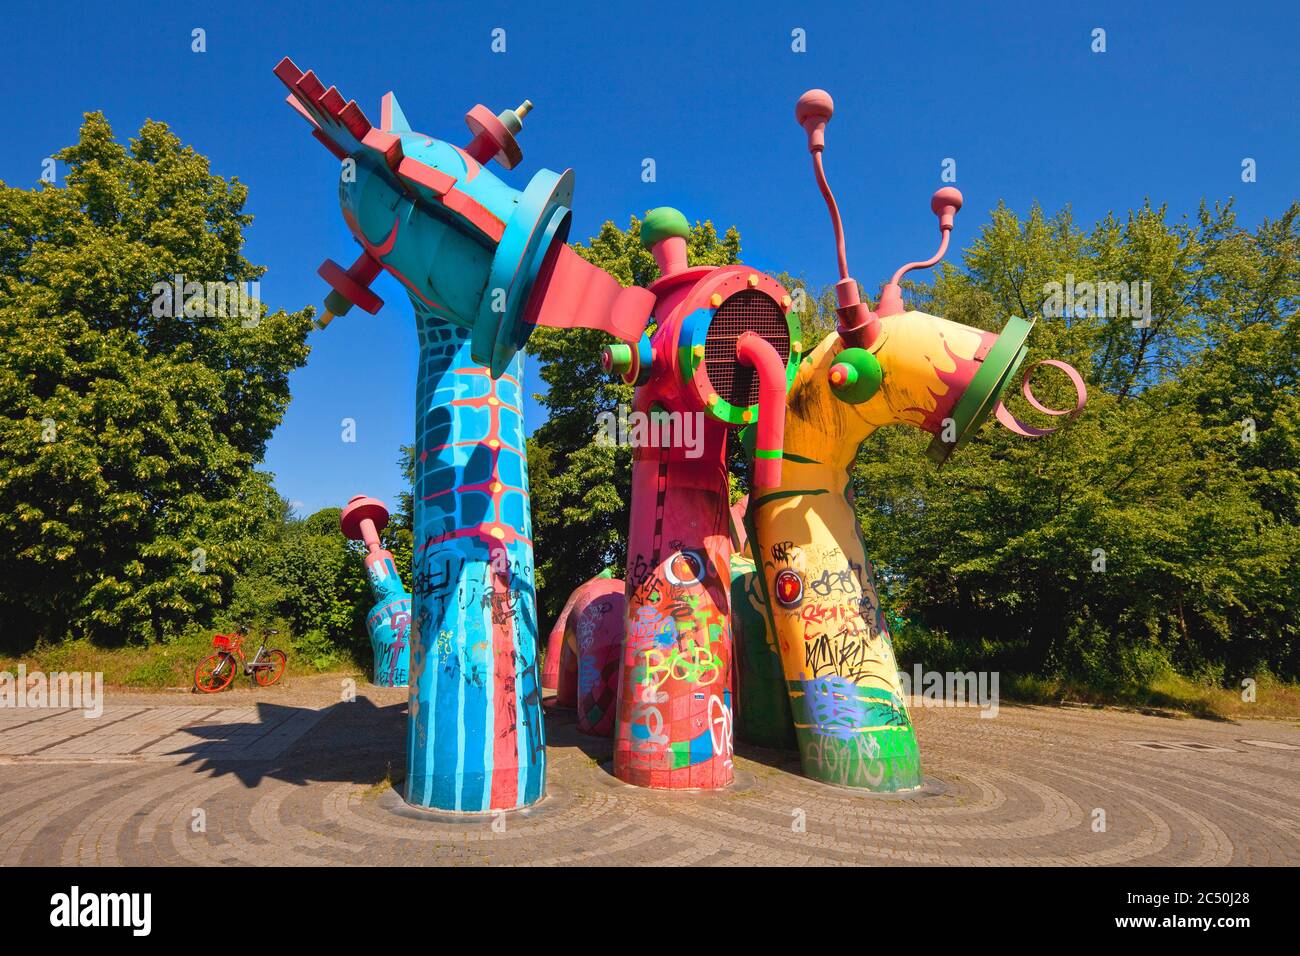 art piece Nessy-Family, the monsters are an artistic air blow system for an subterrestrial duct, Germany, North Rhine-Westphalia, Lower Rhine, Dusseldorf Stock Photo